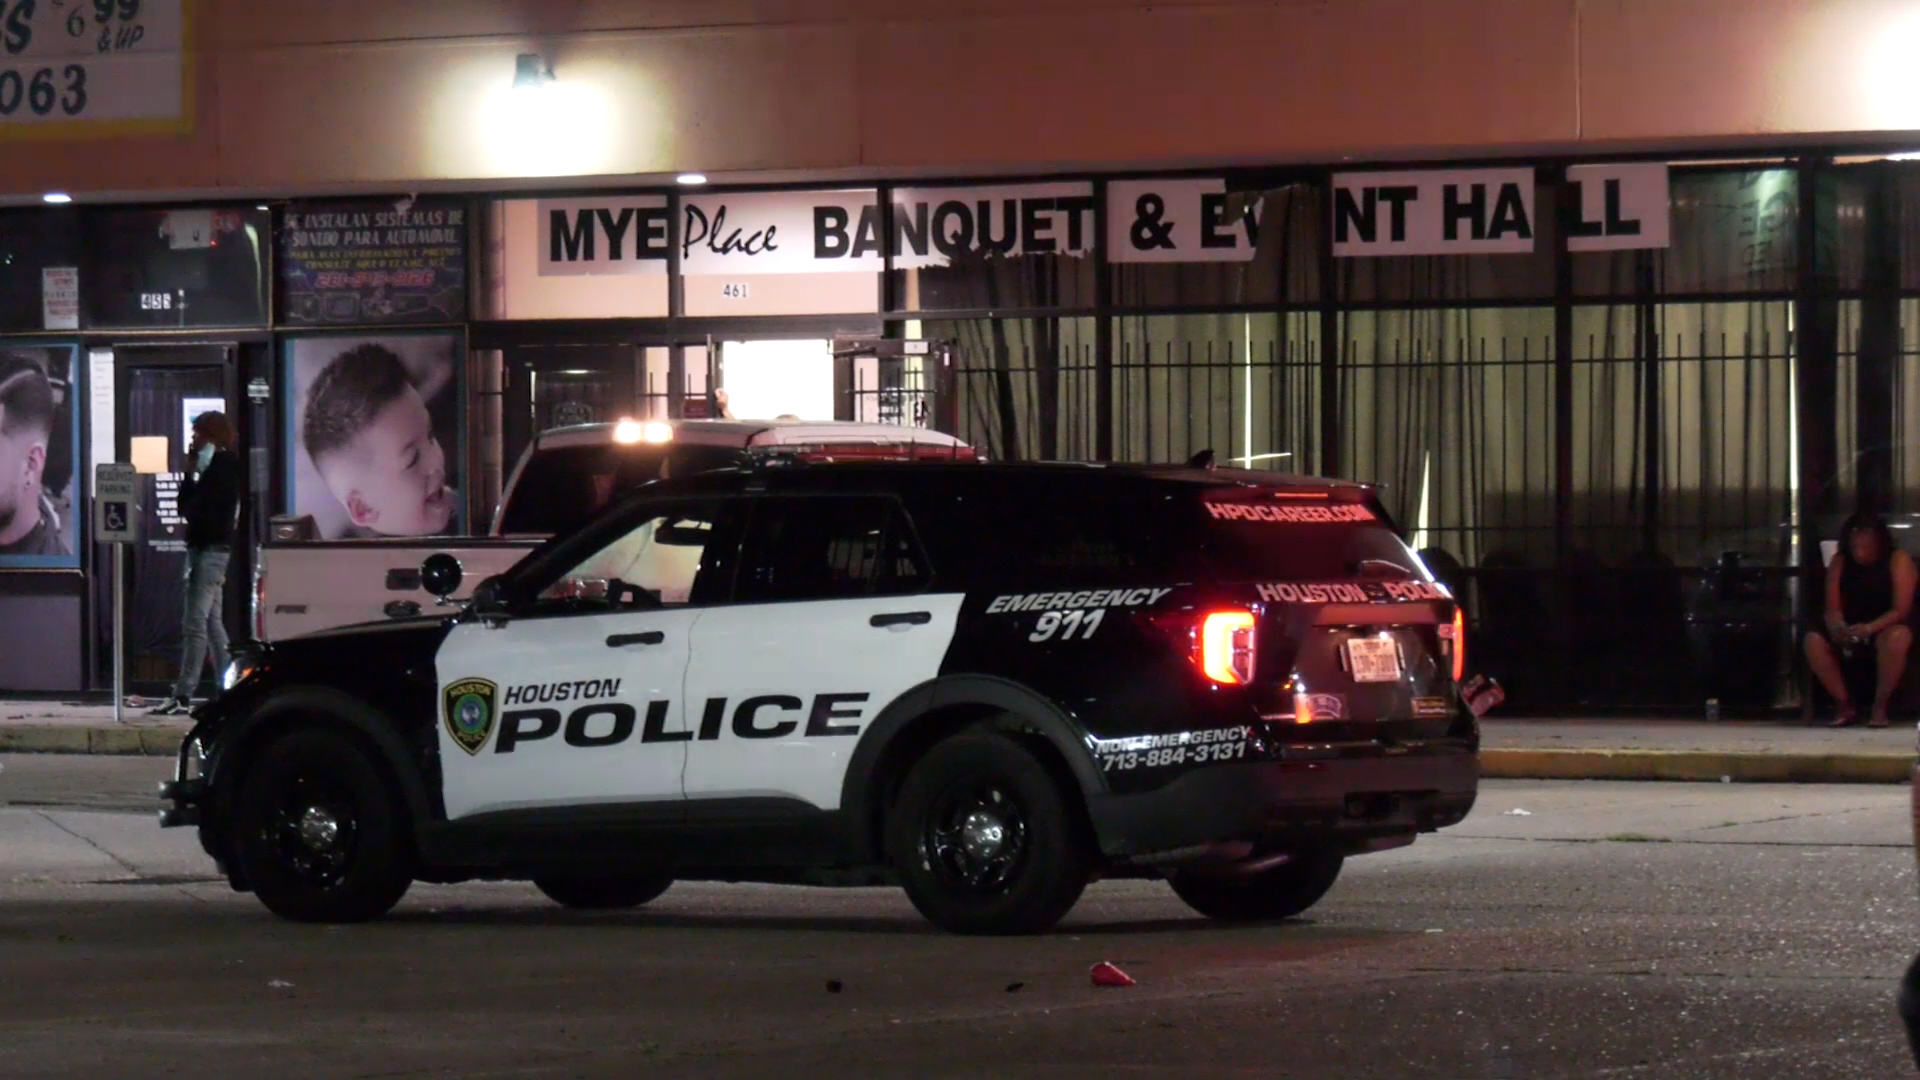 Three people were shot at a north Houston banquet hall late Sunday, police said.